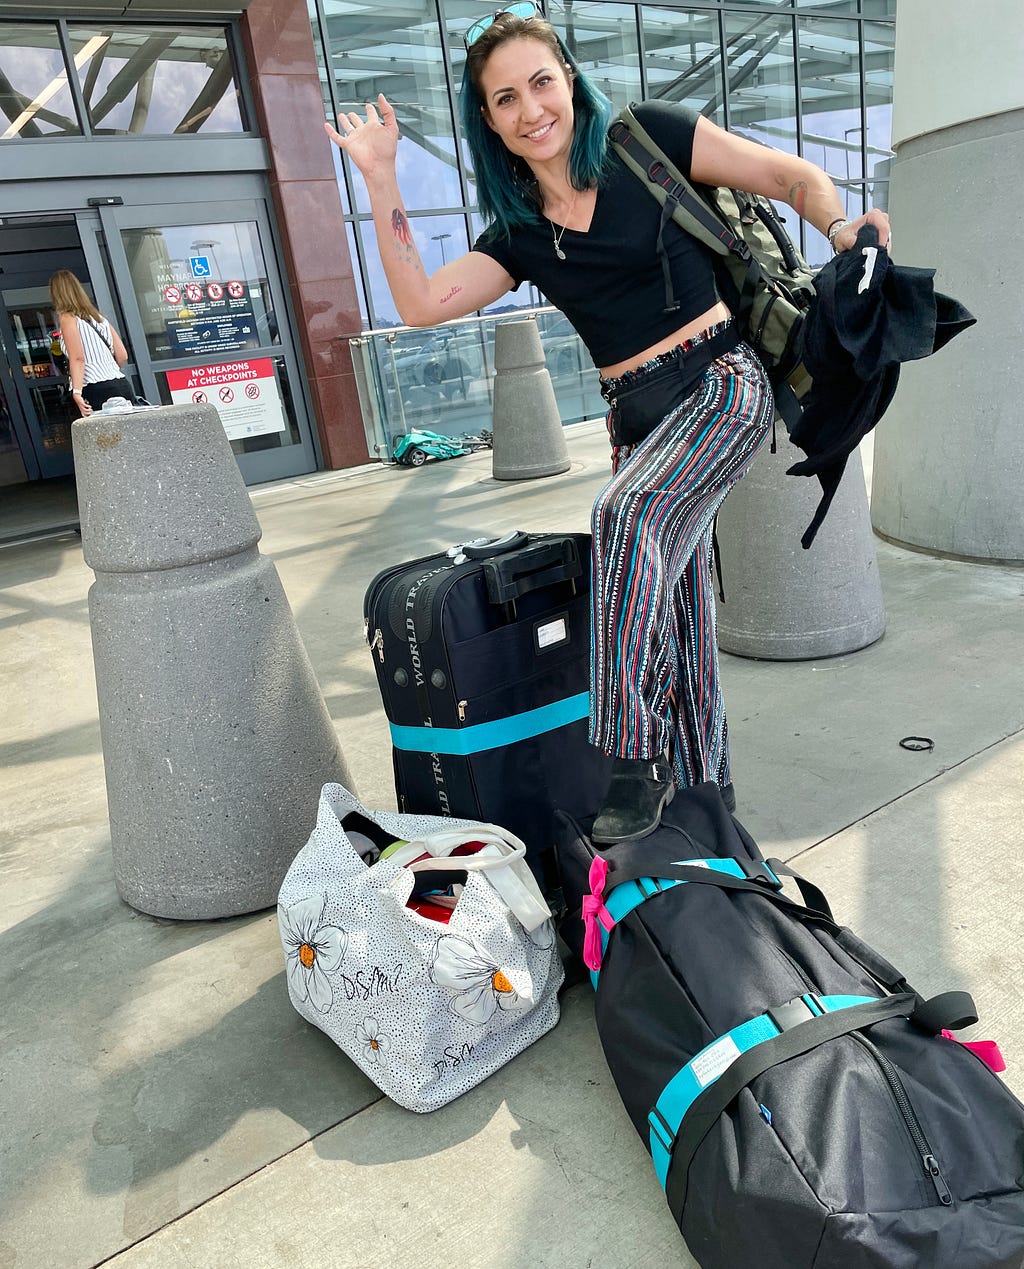 Woman waves goodbye at airport with large suitcases